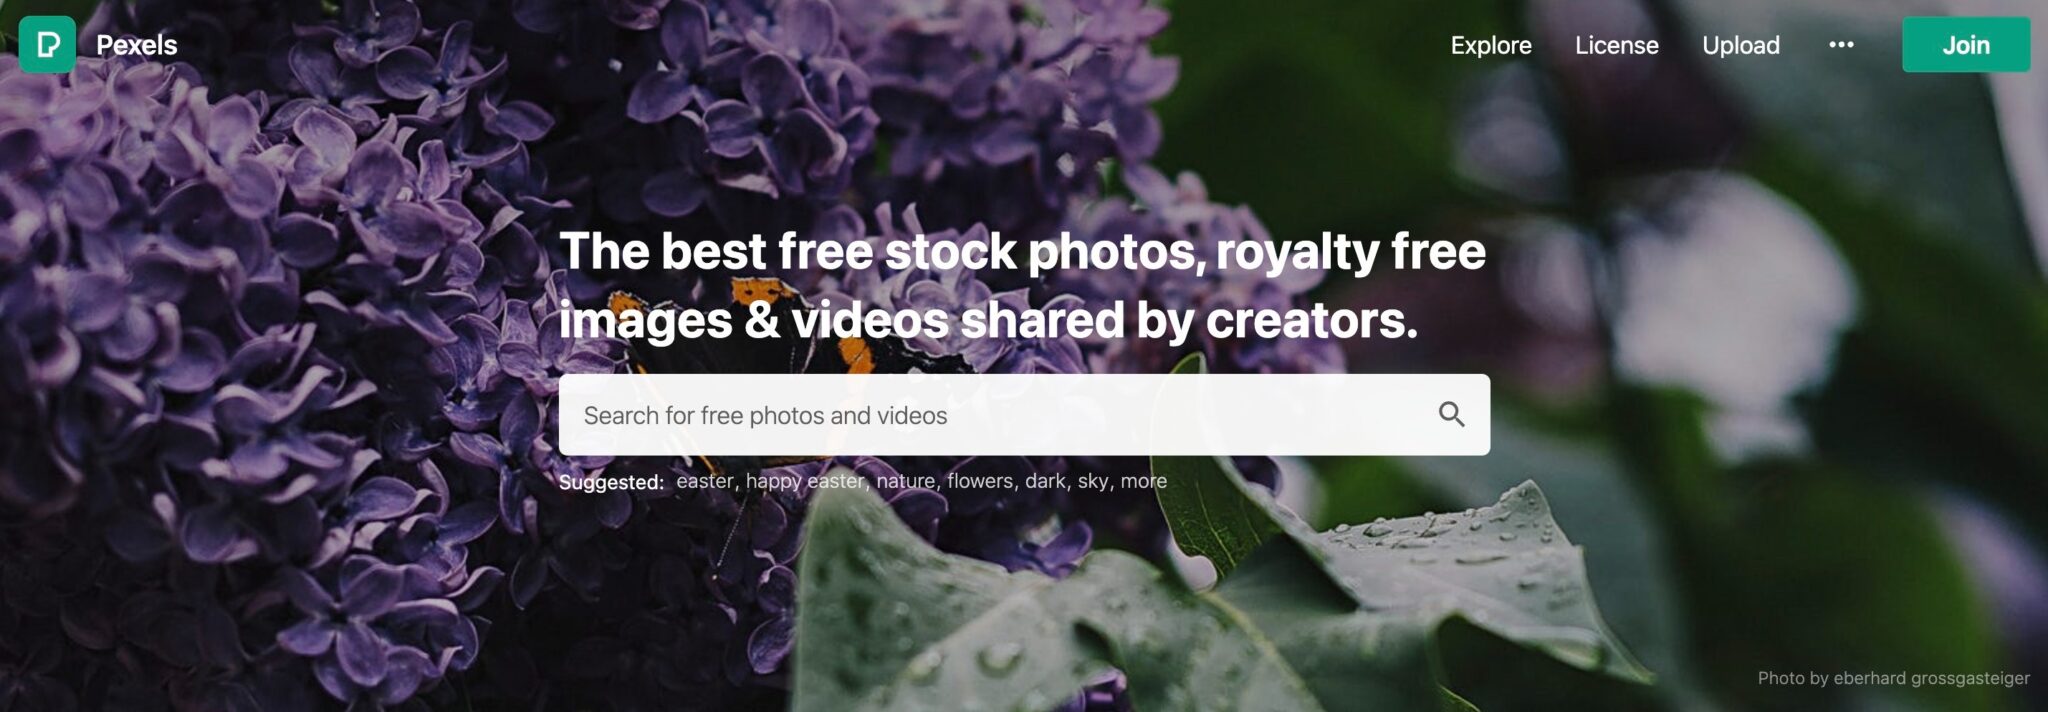 Screenshot of Free Stock Photos Royalty Free Stock Images Copyright Free Pictures · Pexels scaled